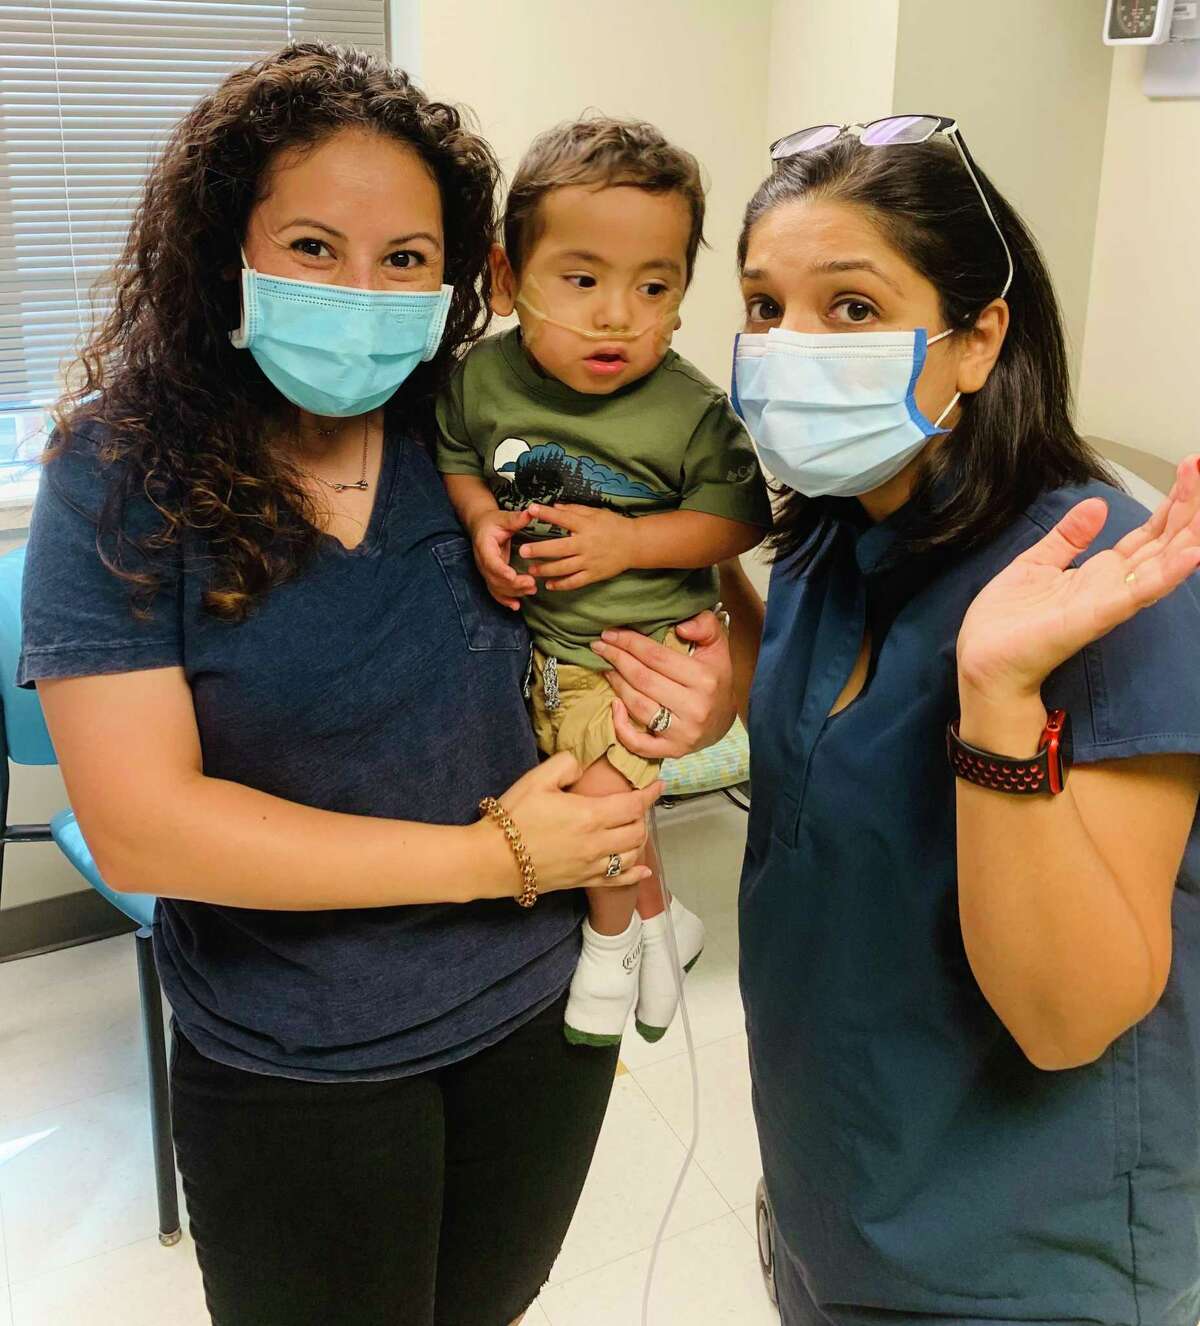 Noah Ordaz with Fatima Boricha, a pediatrician with McGovern Medical School at UTHealth Houston and UT Physicians who is also affiliated with Children’s Memorial Hermann Hospital.